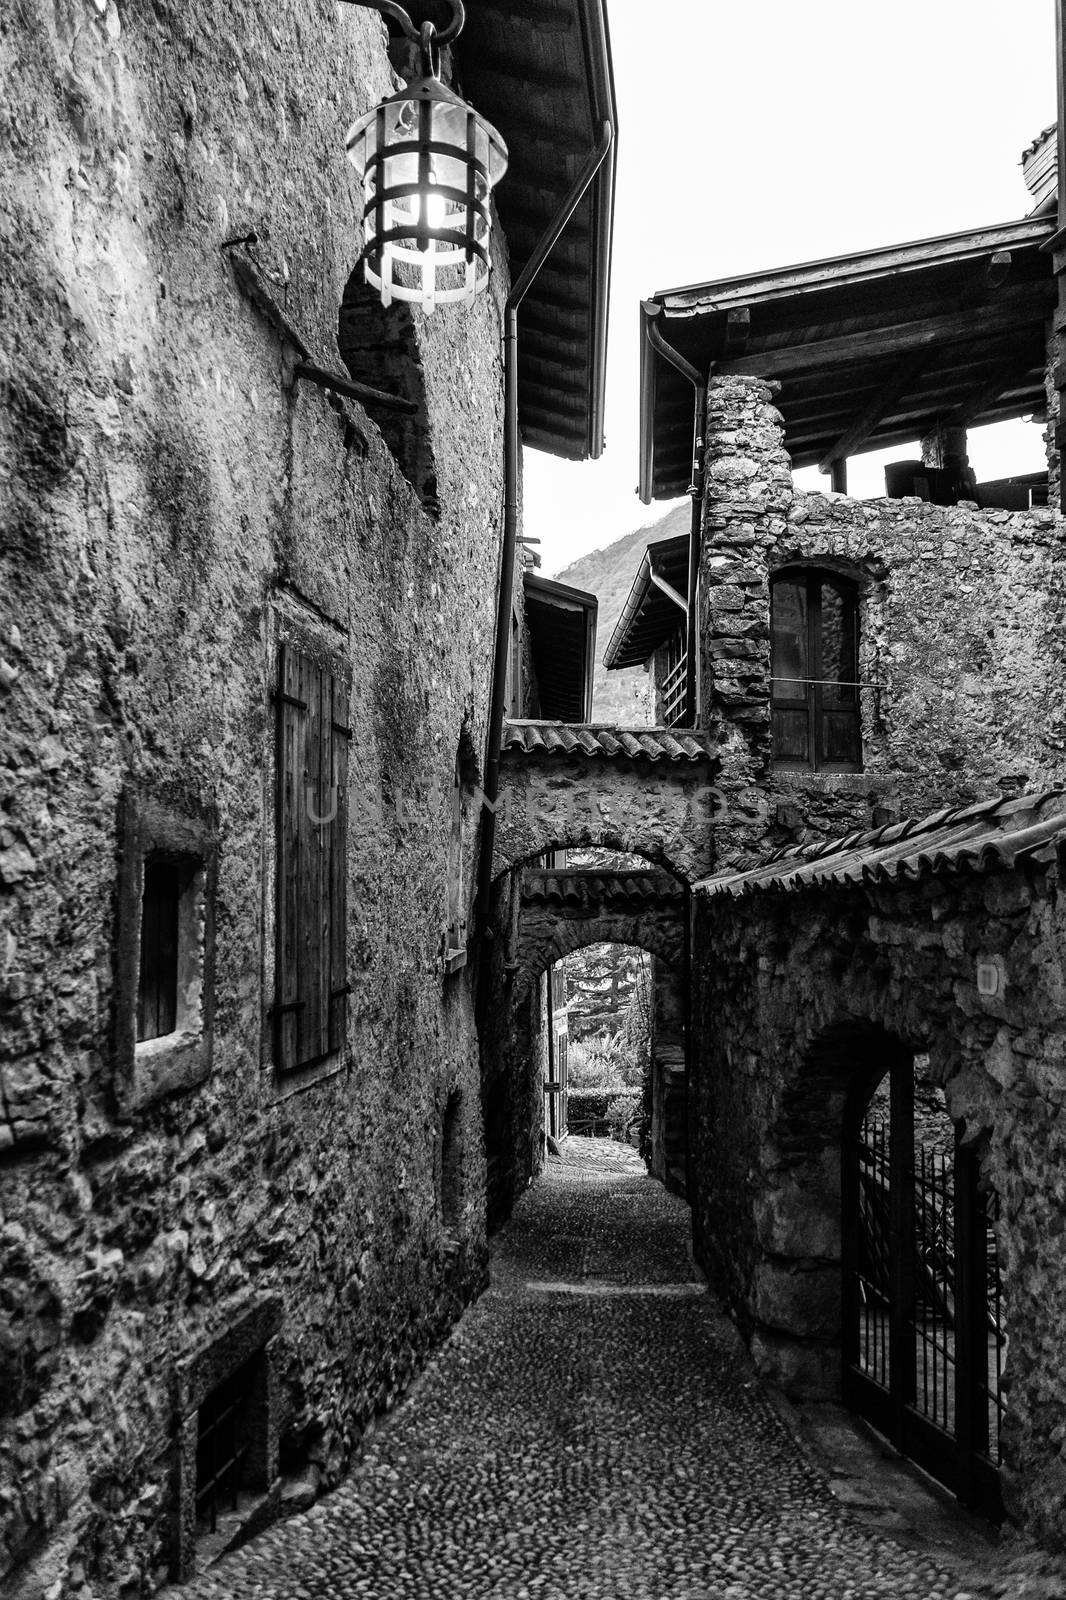 Narrow alley in a medieval village in northern Italy.